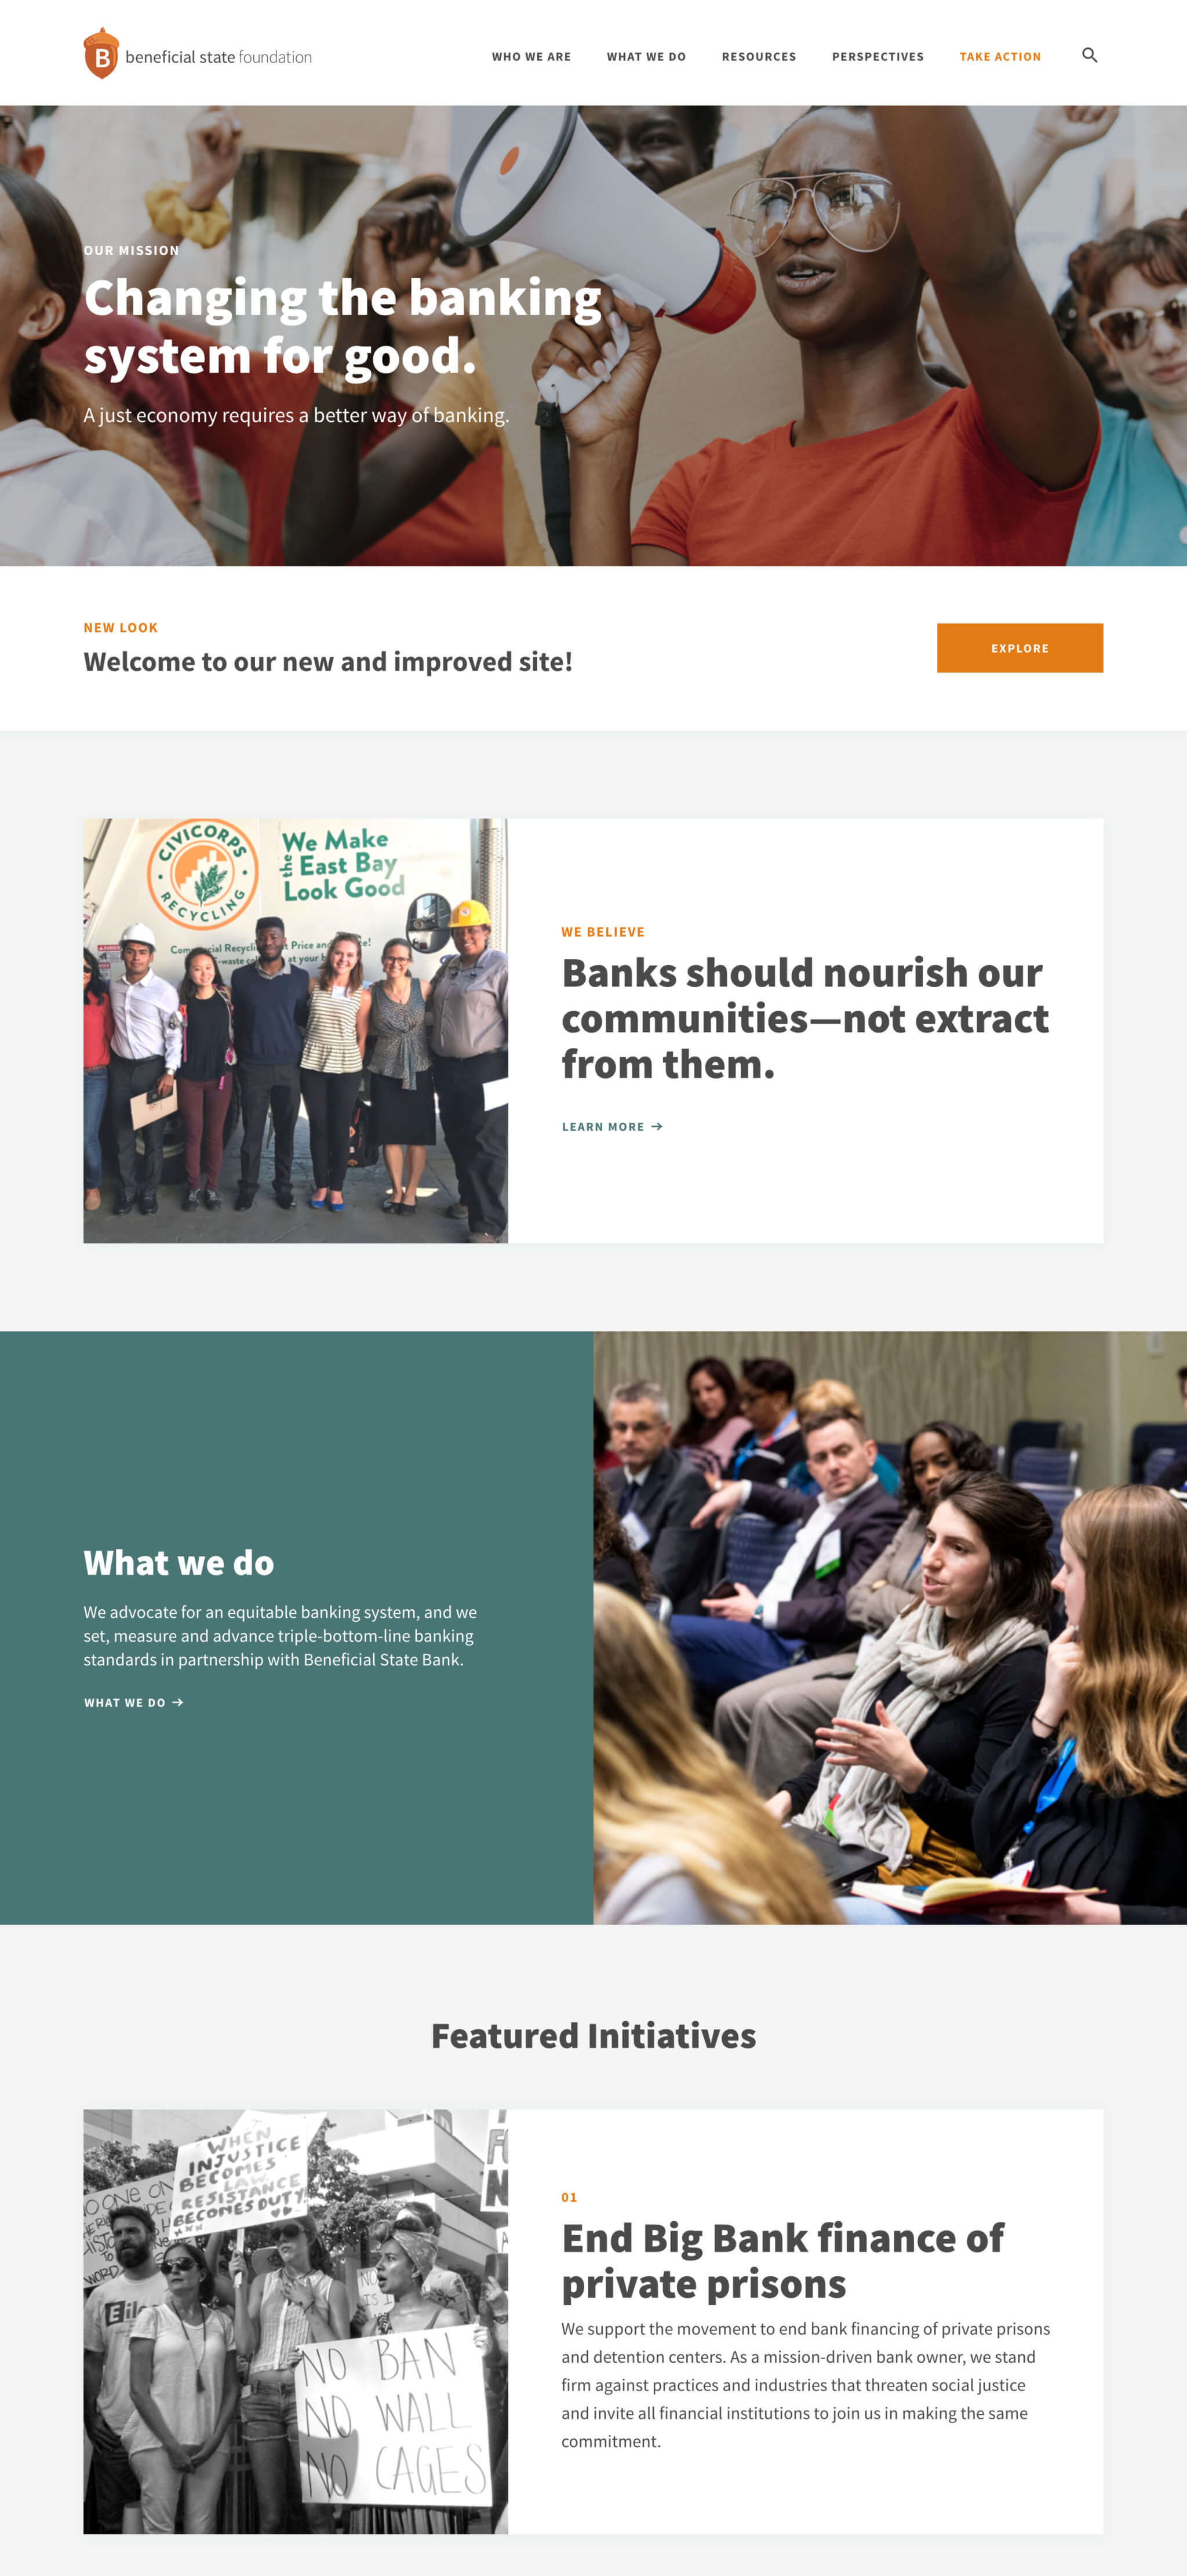 A page from Beneficial State Foundation website showing images and text